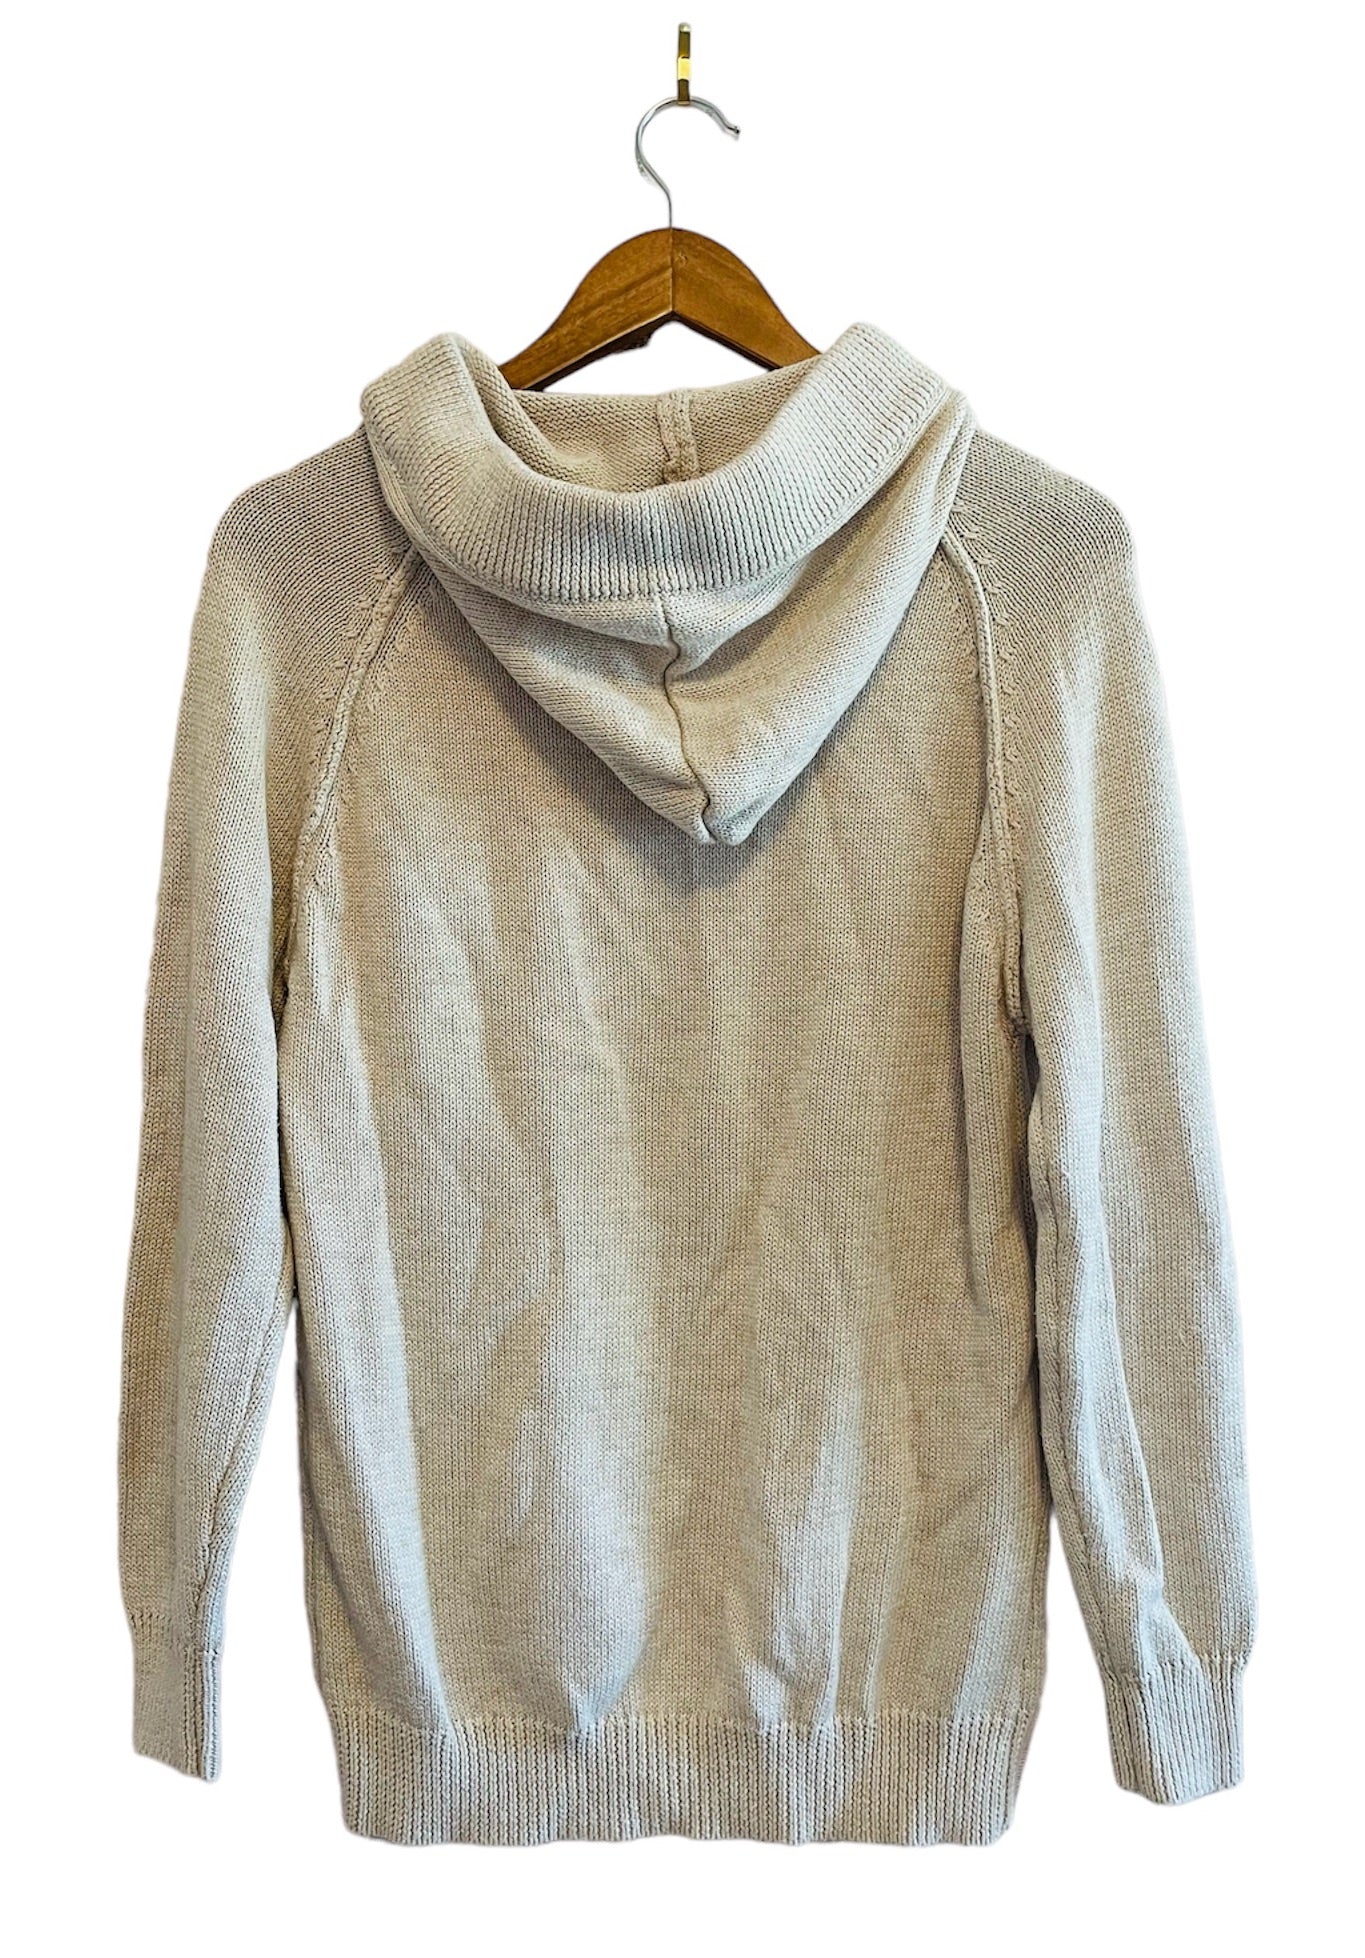 Everyday Hooded Sweater Size: Small